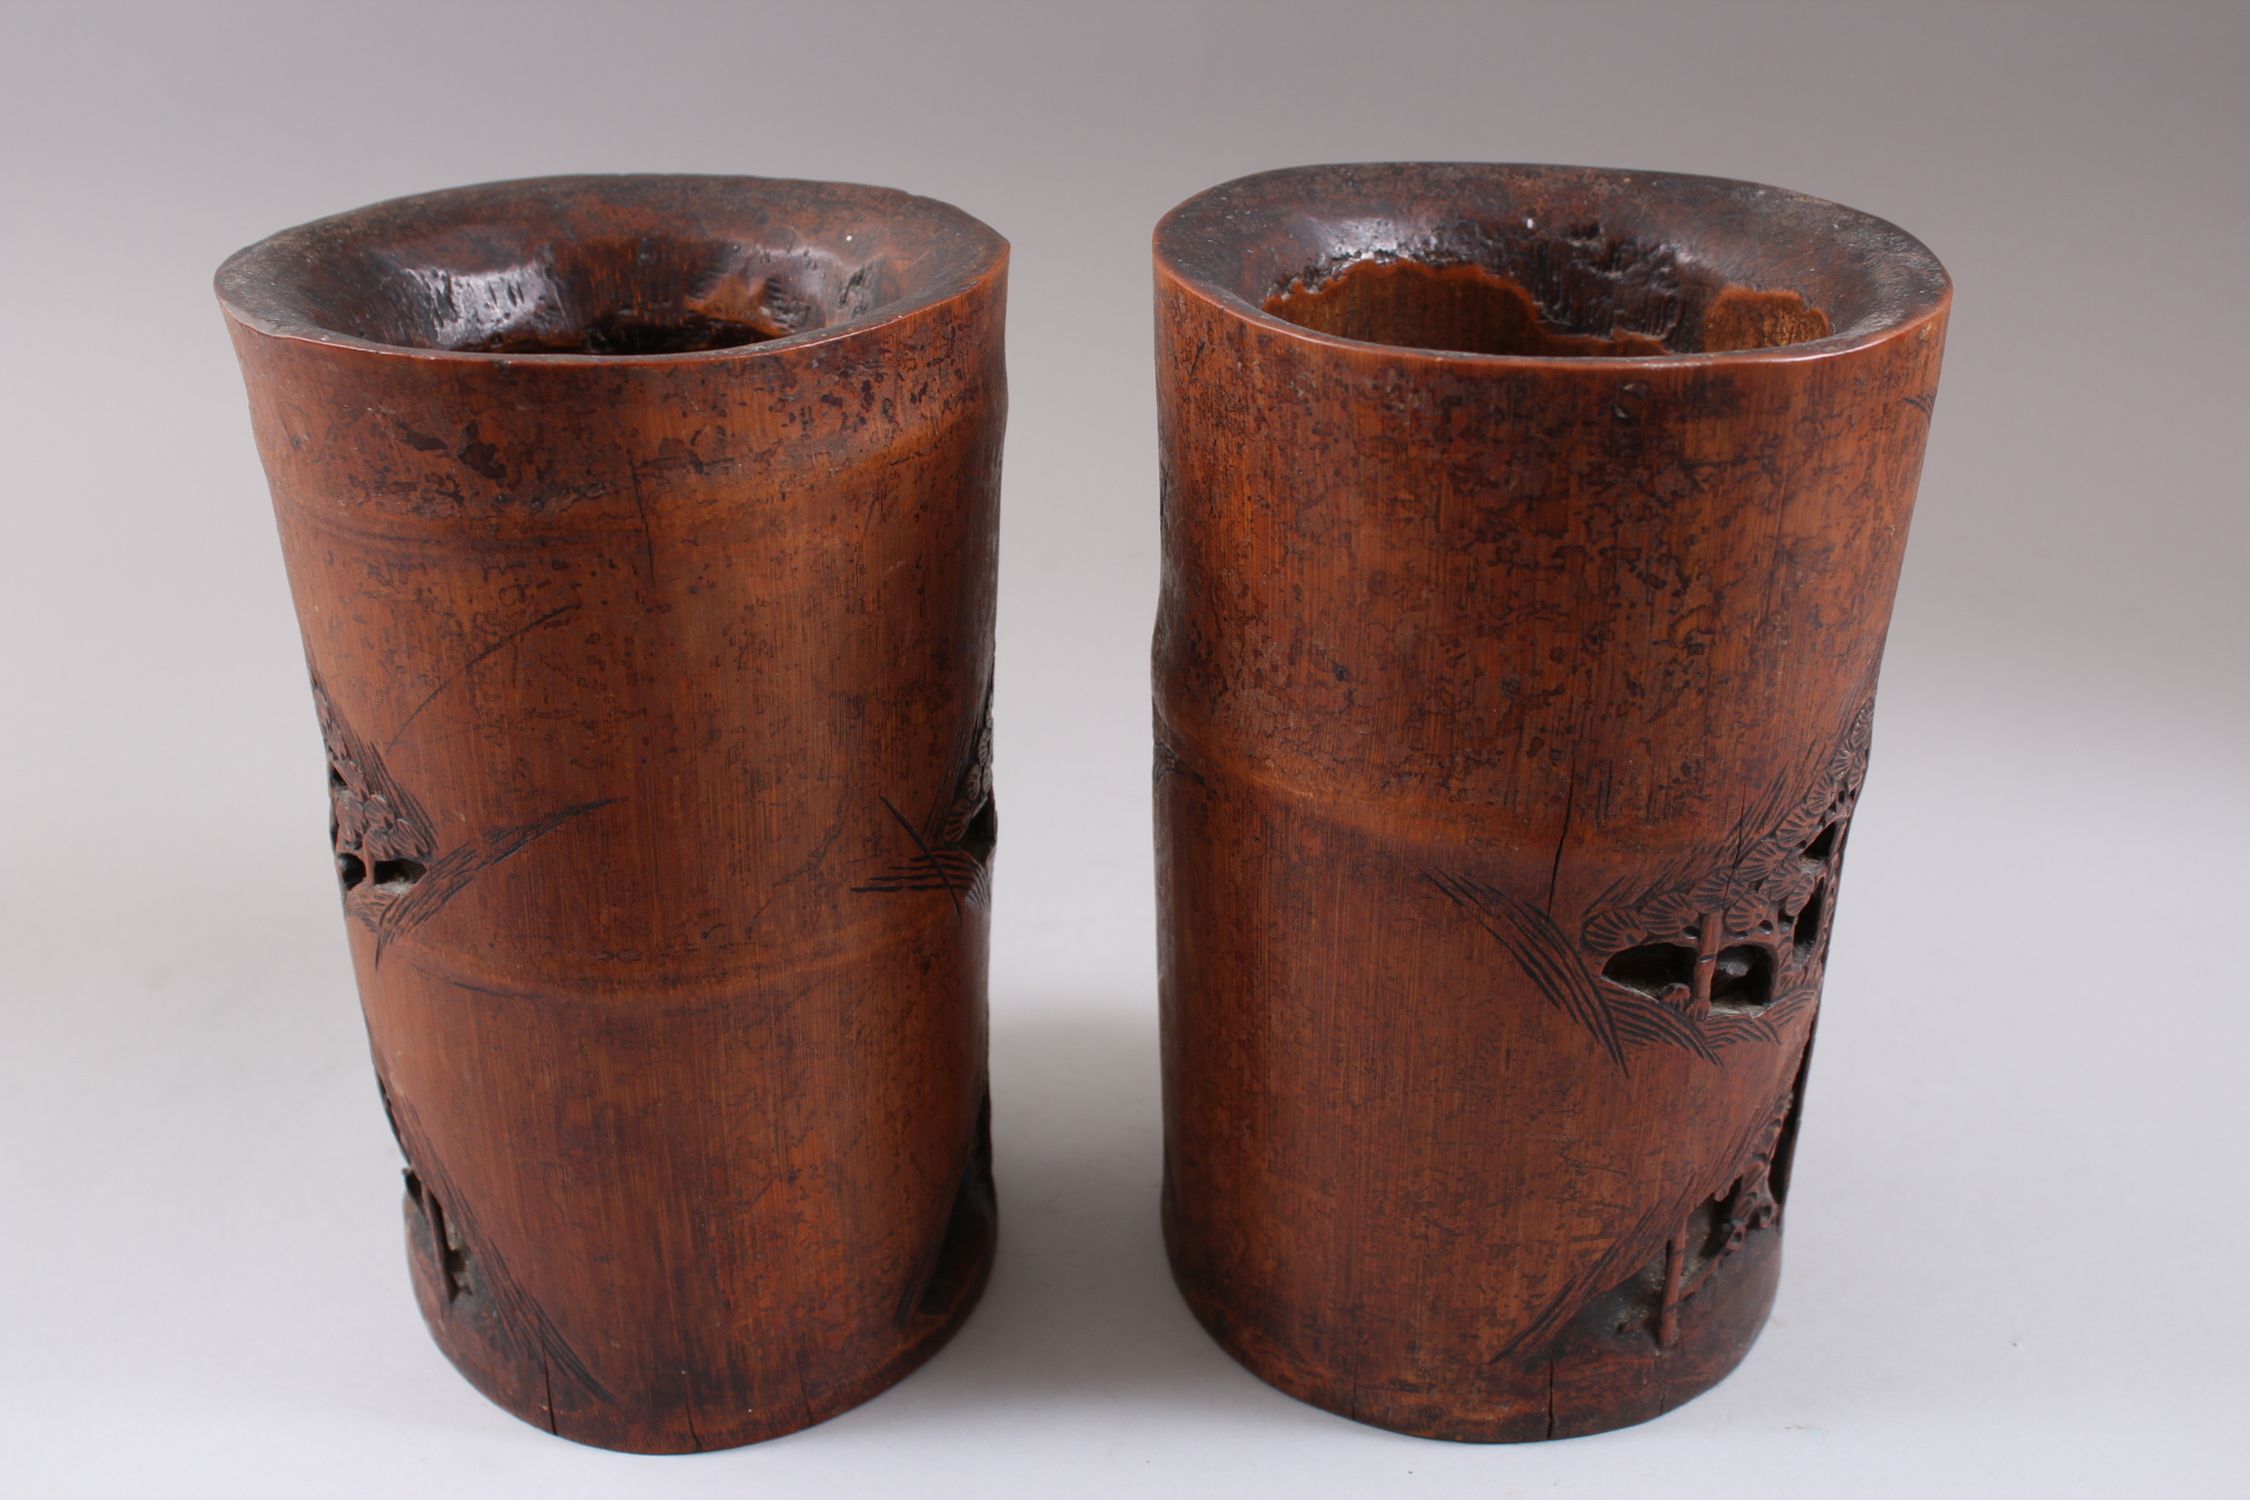 A PAIR OF CHINESE 19TH CENTURY BAMBOO CARVED BRUSH POTS, carved deeply to depict scenes of figures - Image 2 of 3